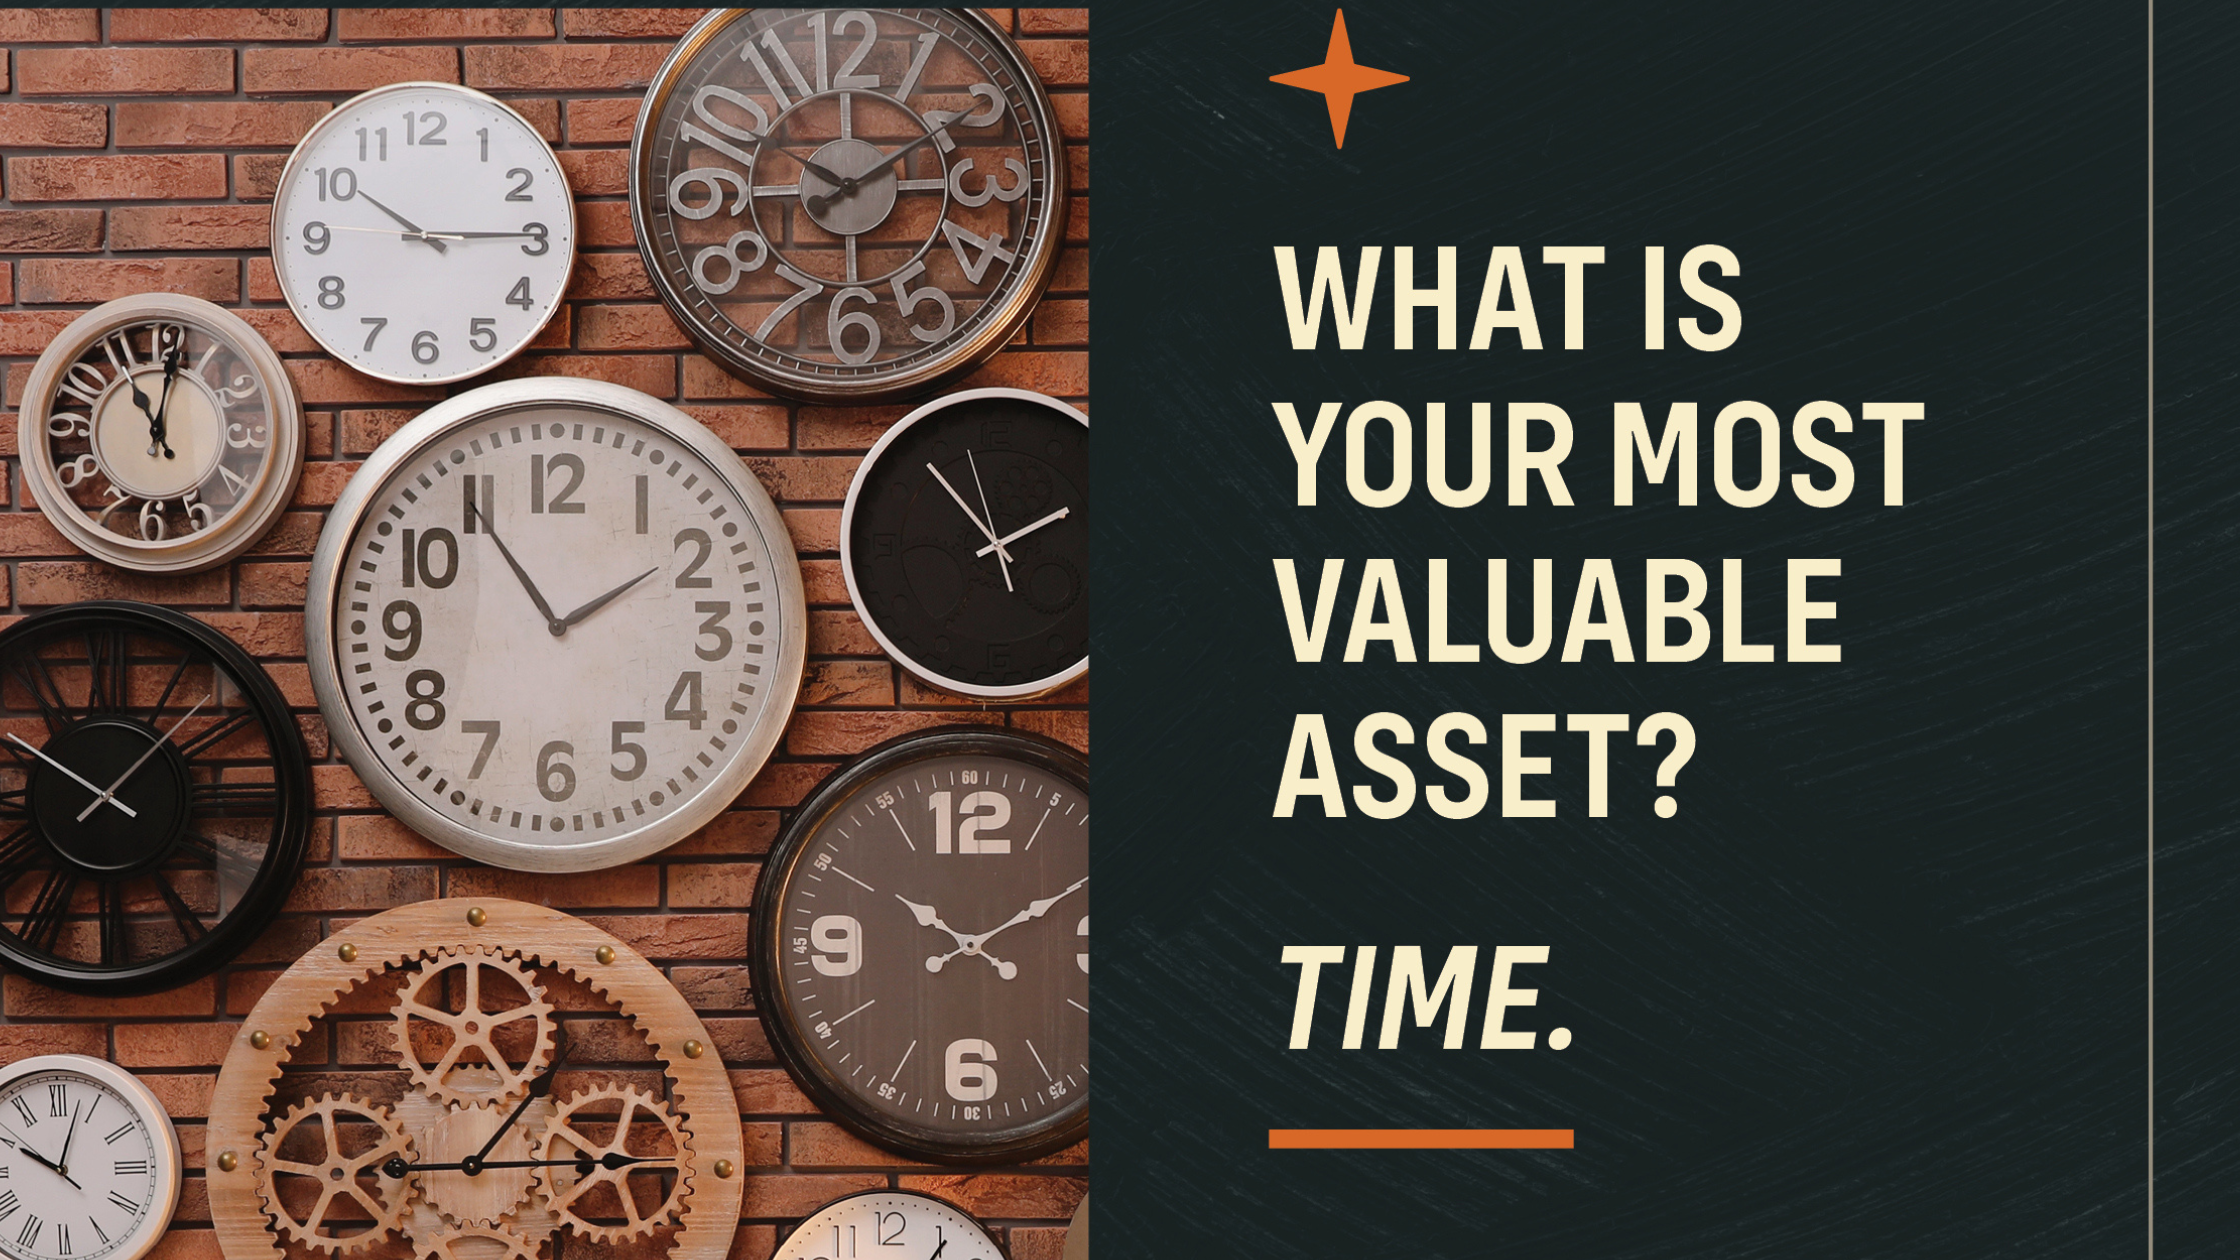 What is your most valuable asset? TIME.